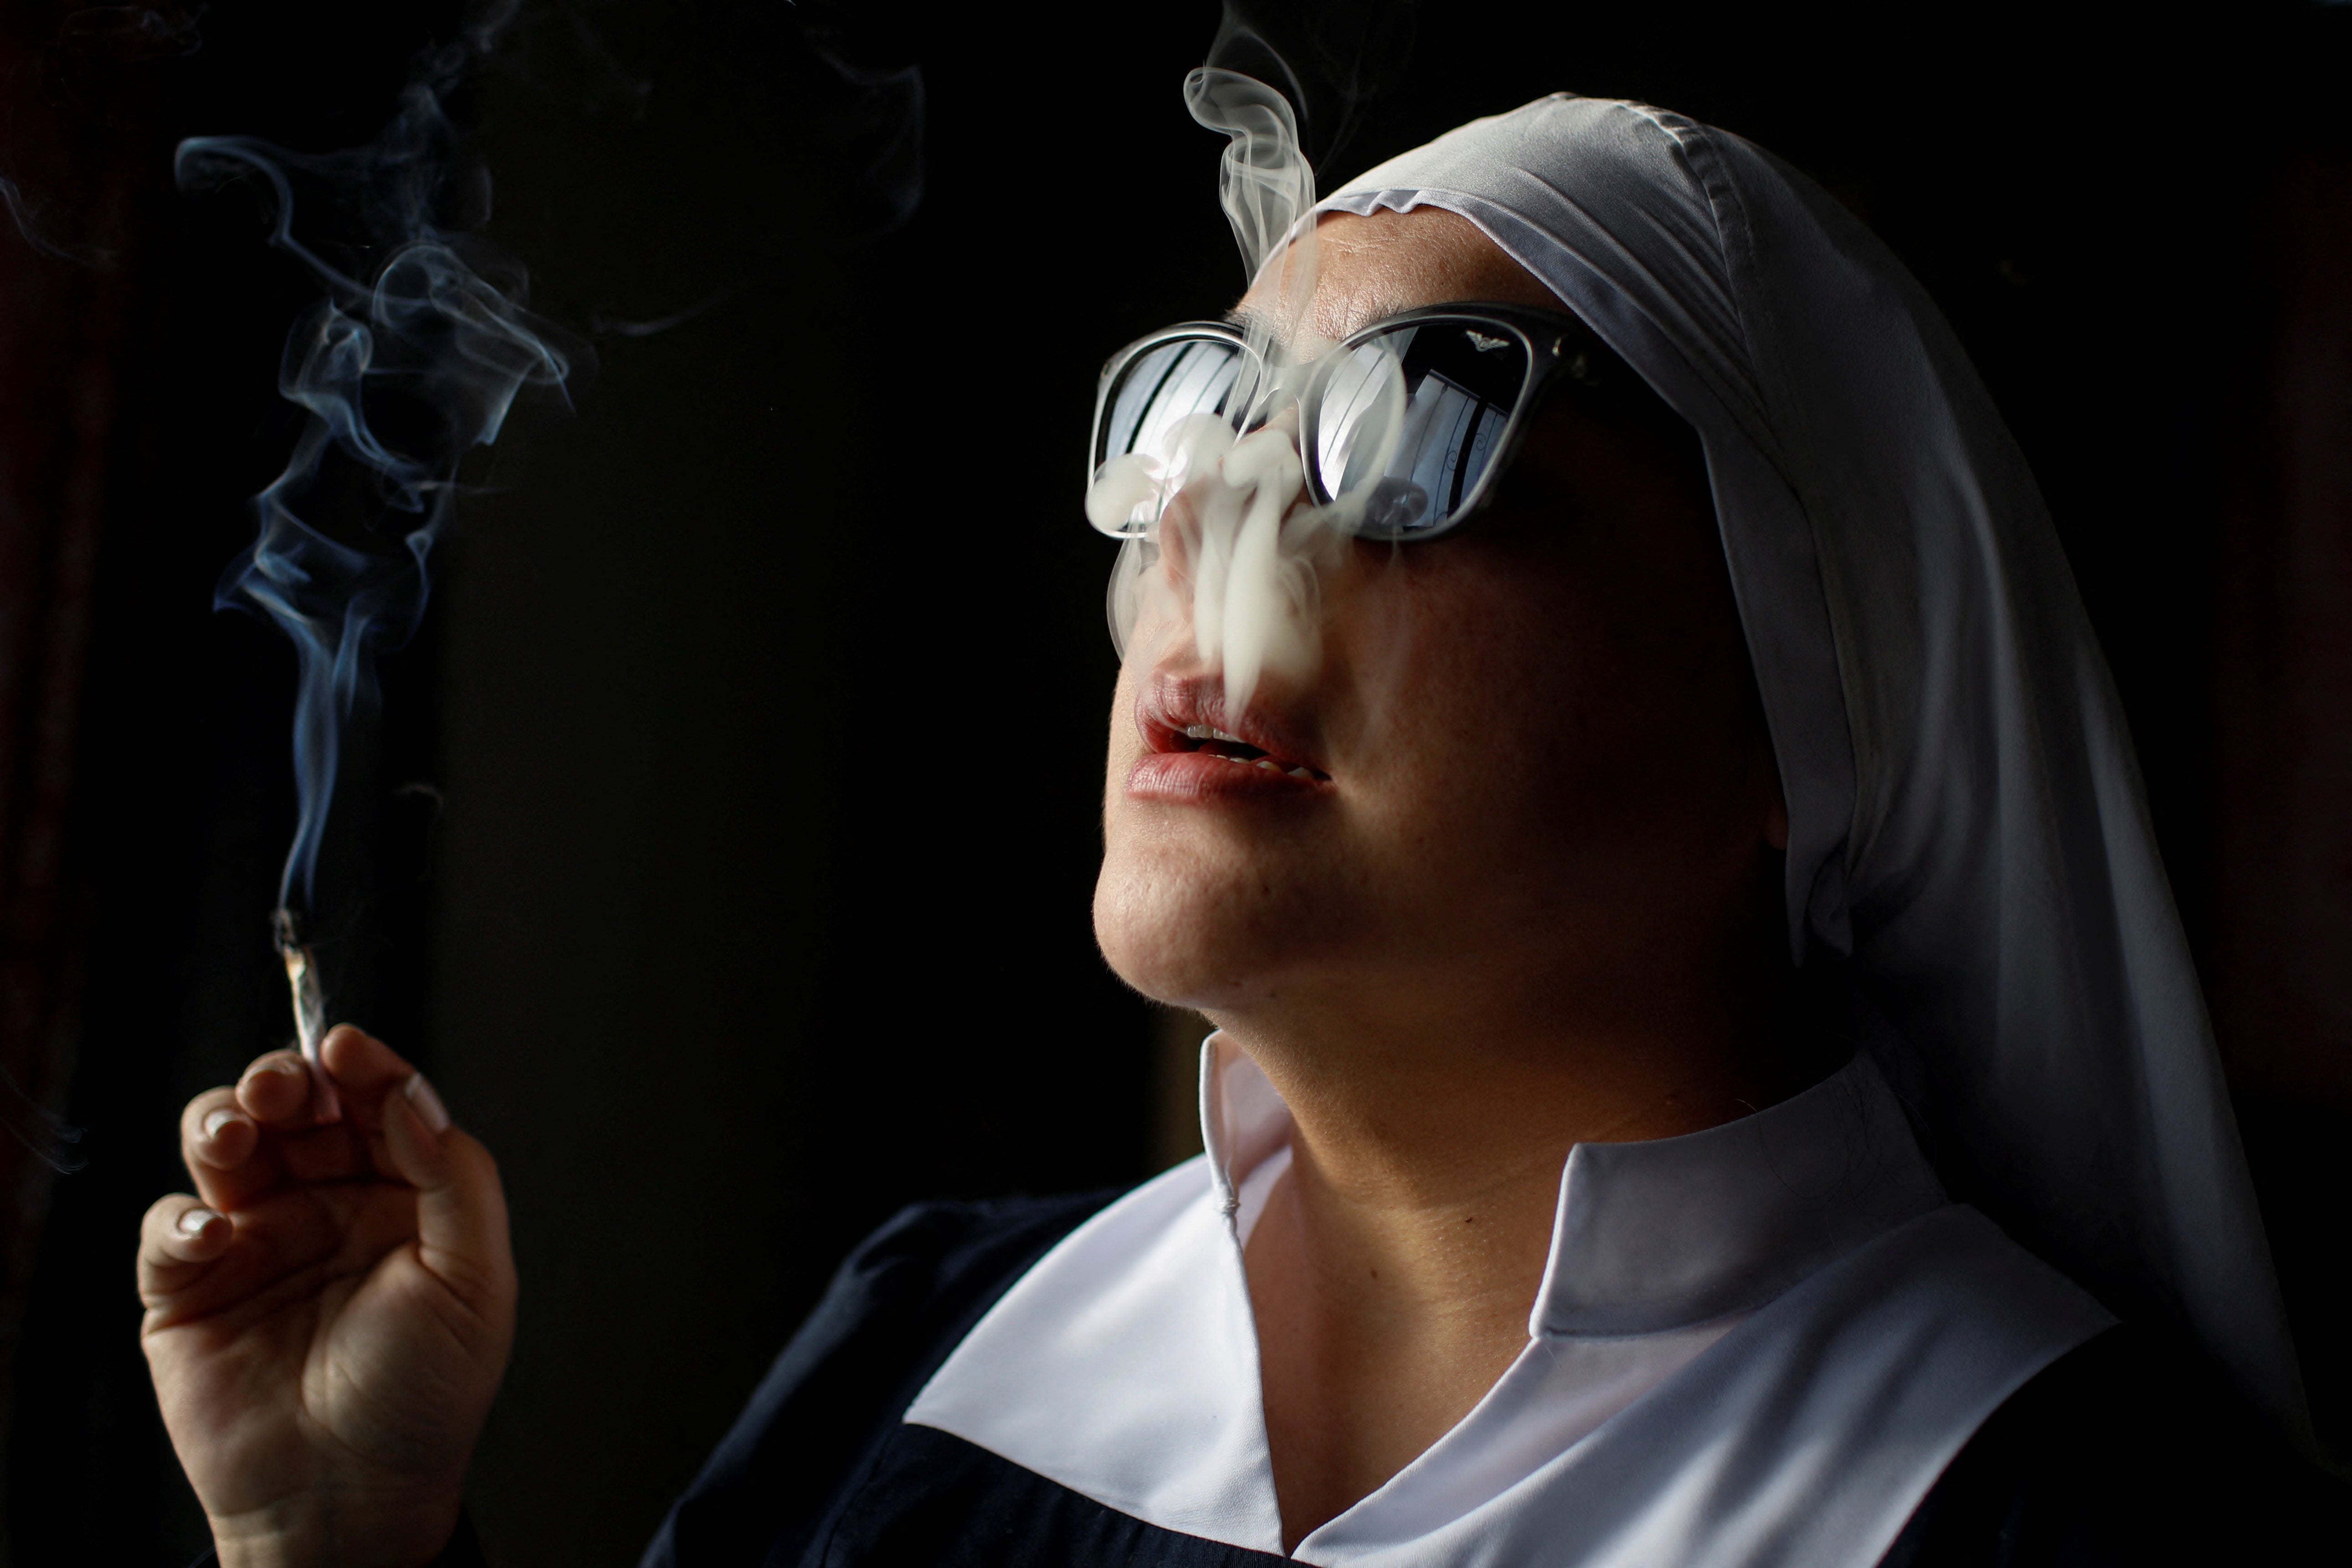 A member of Sisters of the Valley, a non-religious international group founded in 2014, smokes a joint at the group’s farm on the outskirts of a village in central Mexico